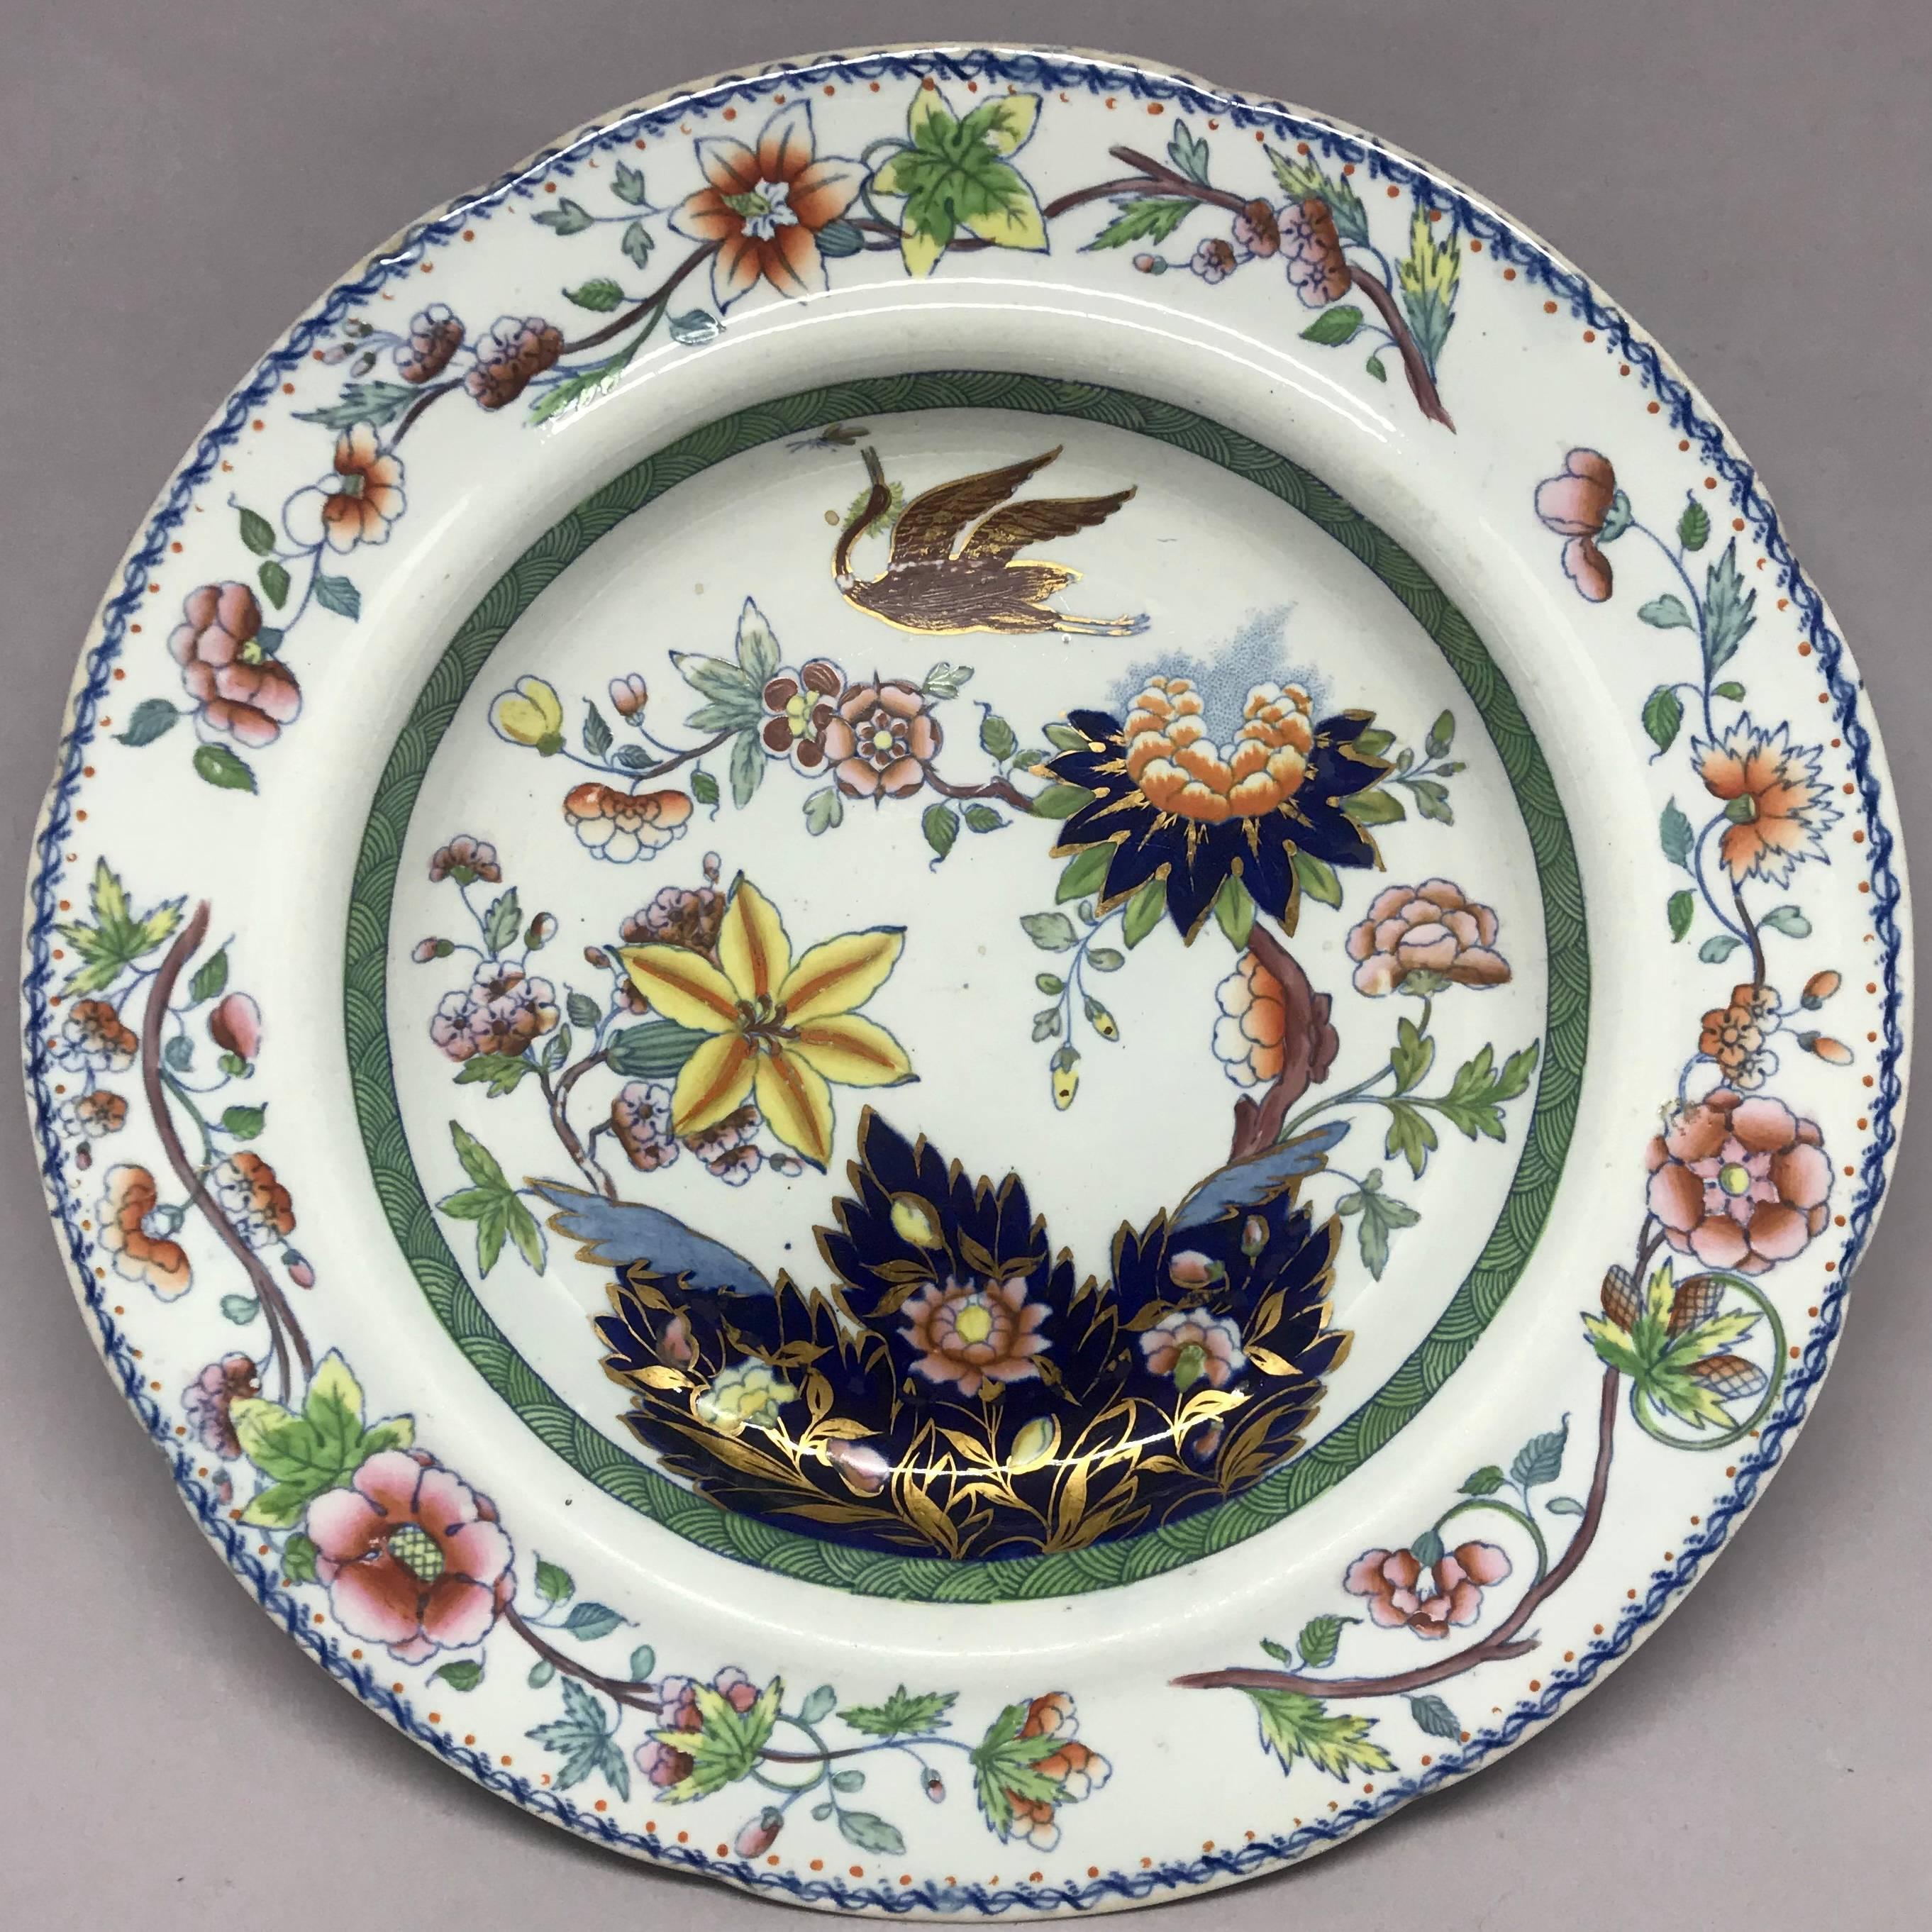 Davenport chinoiserie plate.  Antique plate with flowers and crane in blues, yellows, greens & gilt outlines. Underglaze blue marks for Davenport Stone China. England, circa 1815. 
Dimension: 9.63